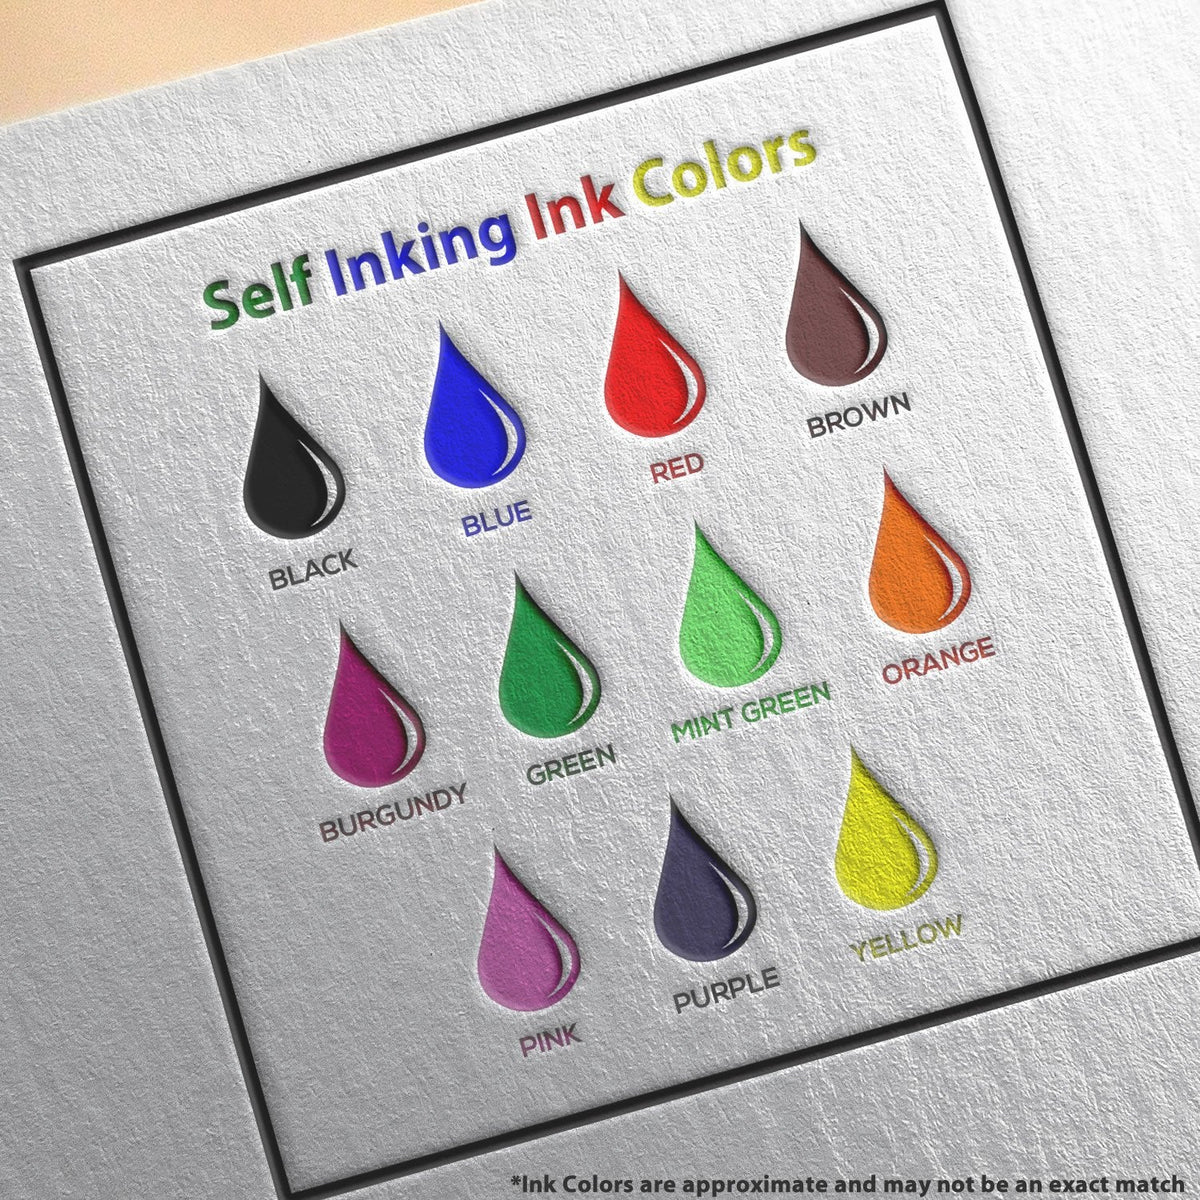 Self-Inking Lets review this with Lamp Stamp Ink Color Options